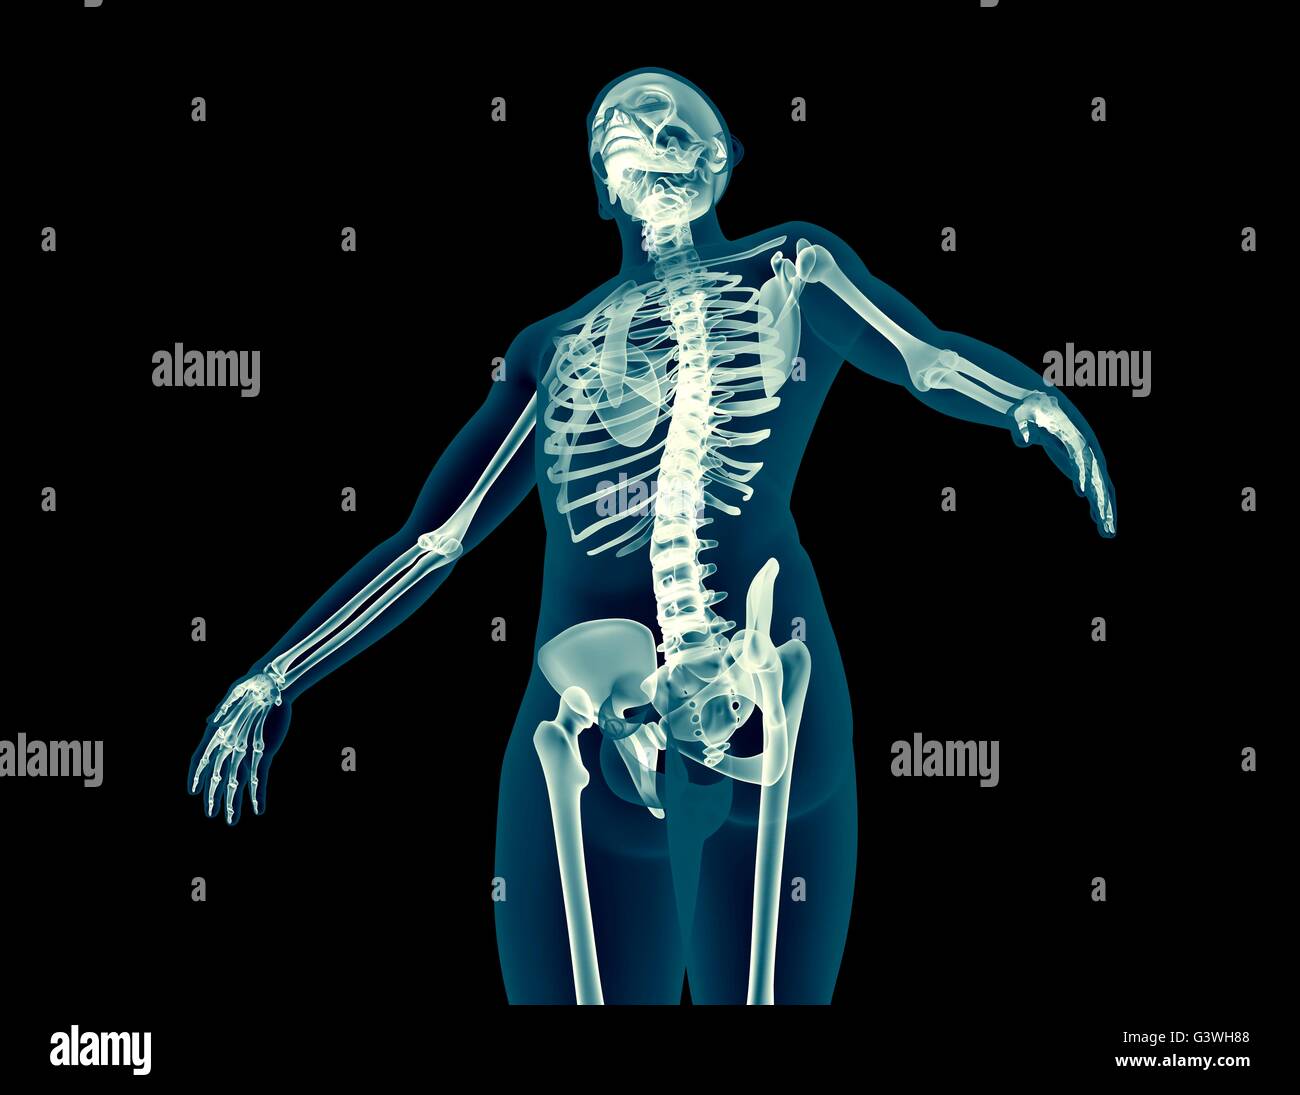 x-ray image of a human body Stock Photo